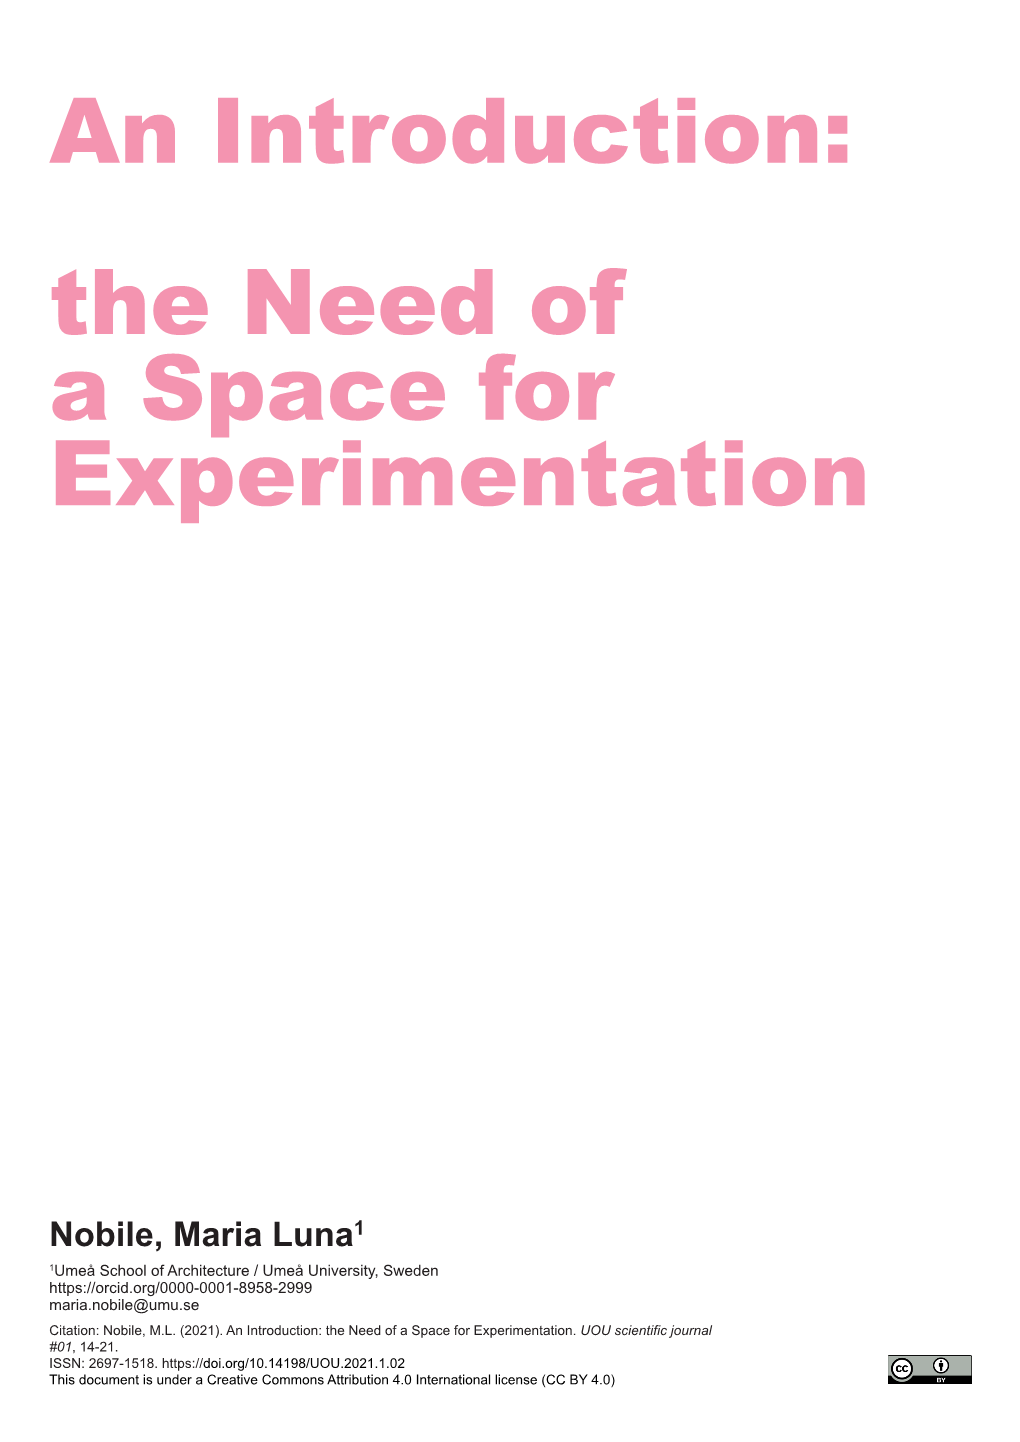 An Introduction: the Need of a Space for Experimentation